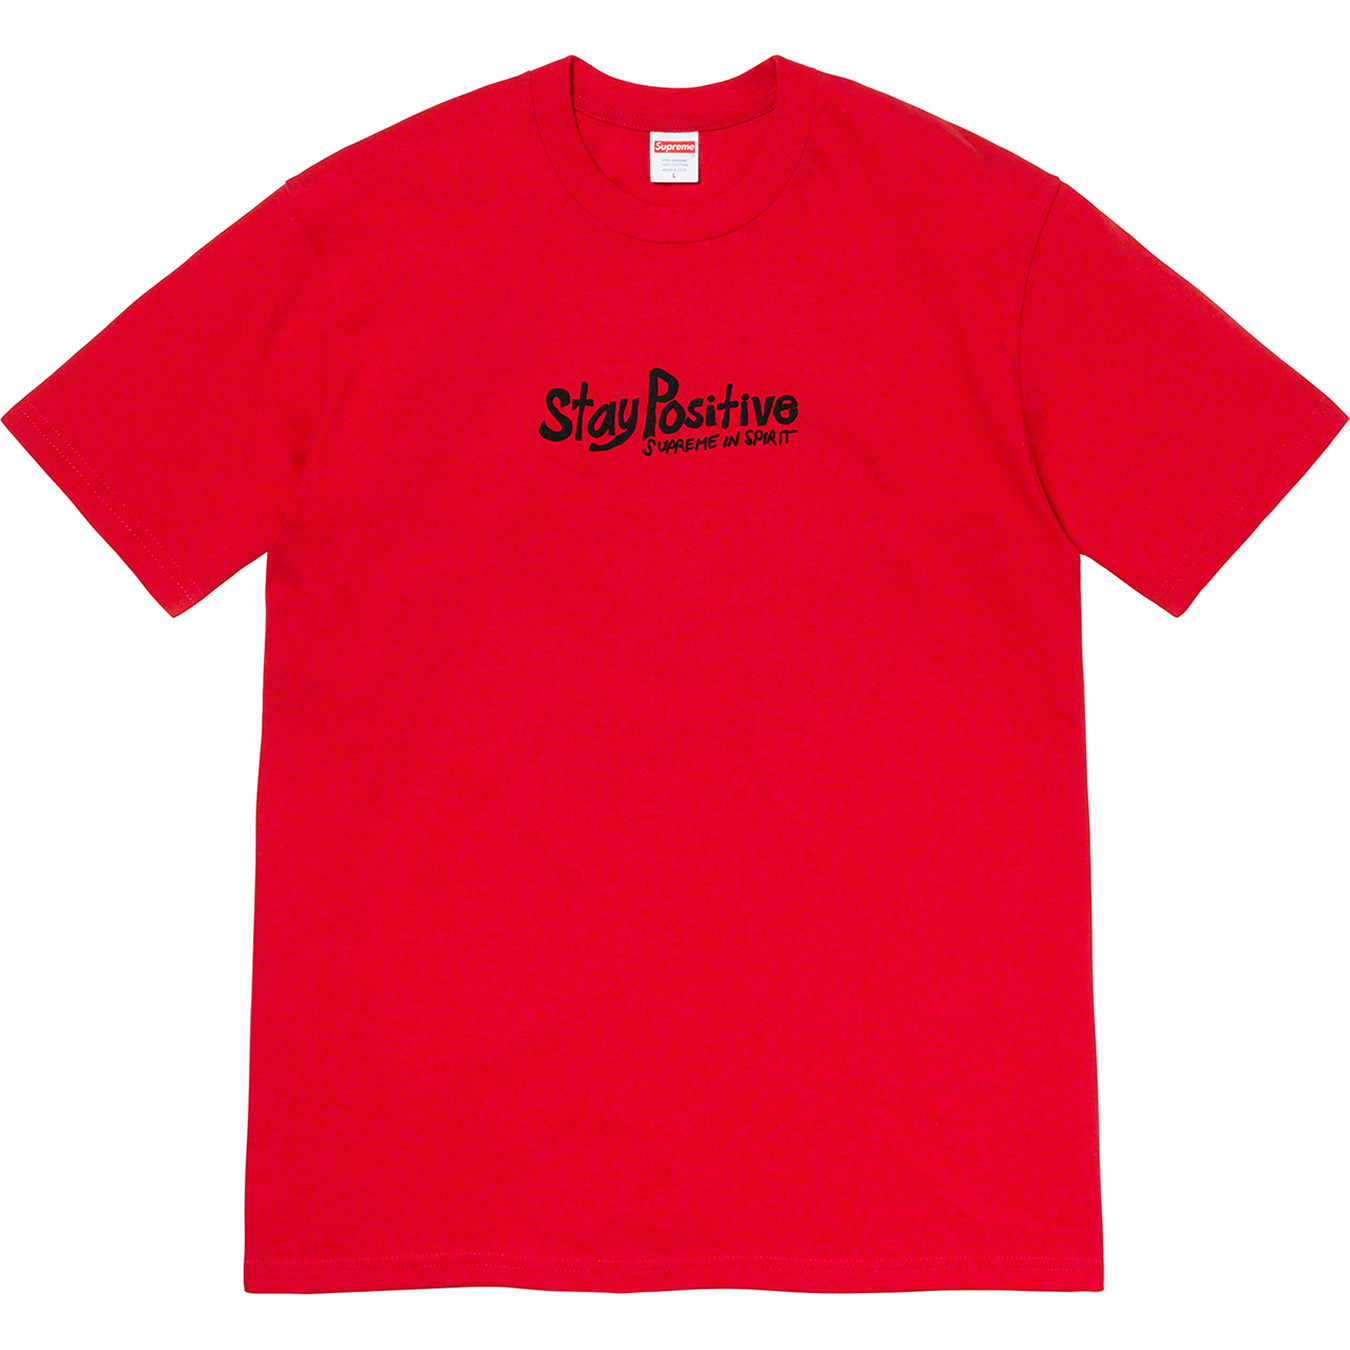 Stay Positive Tee - Supreme Community